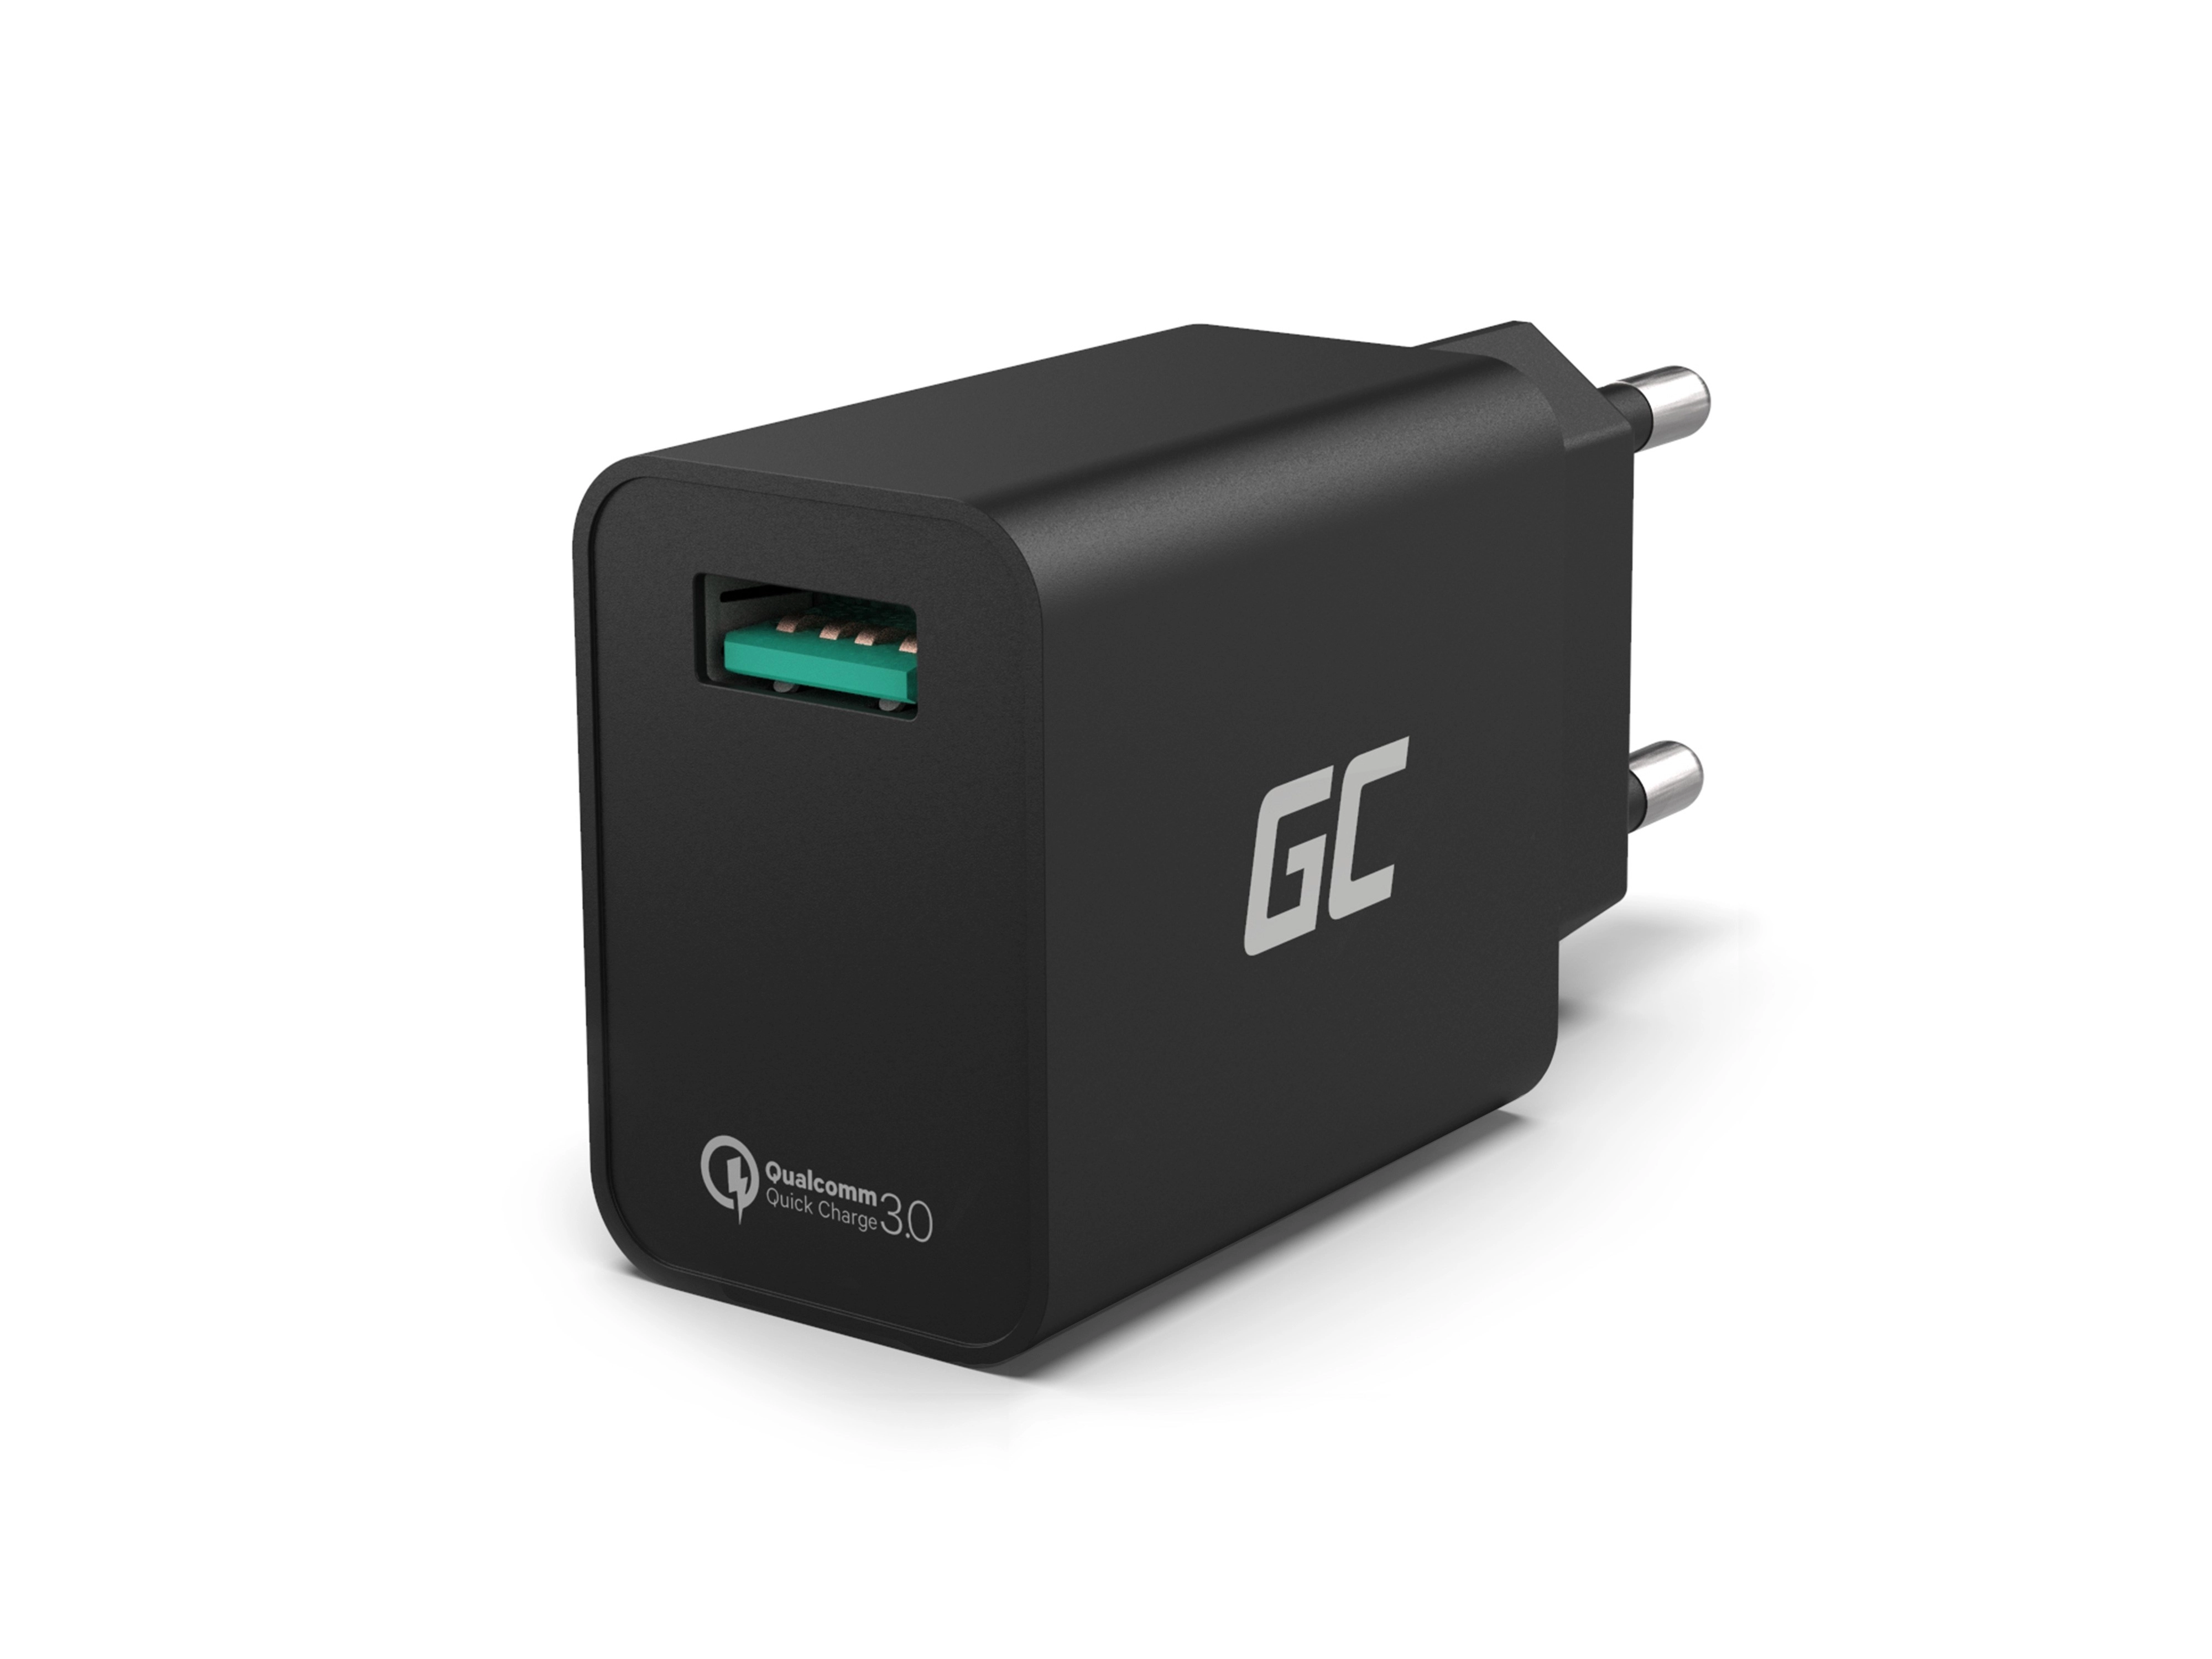 Green Cell Charger USB QC 3.0